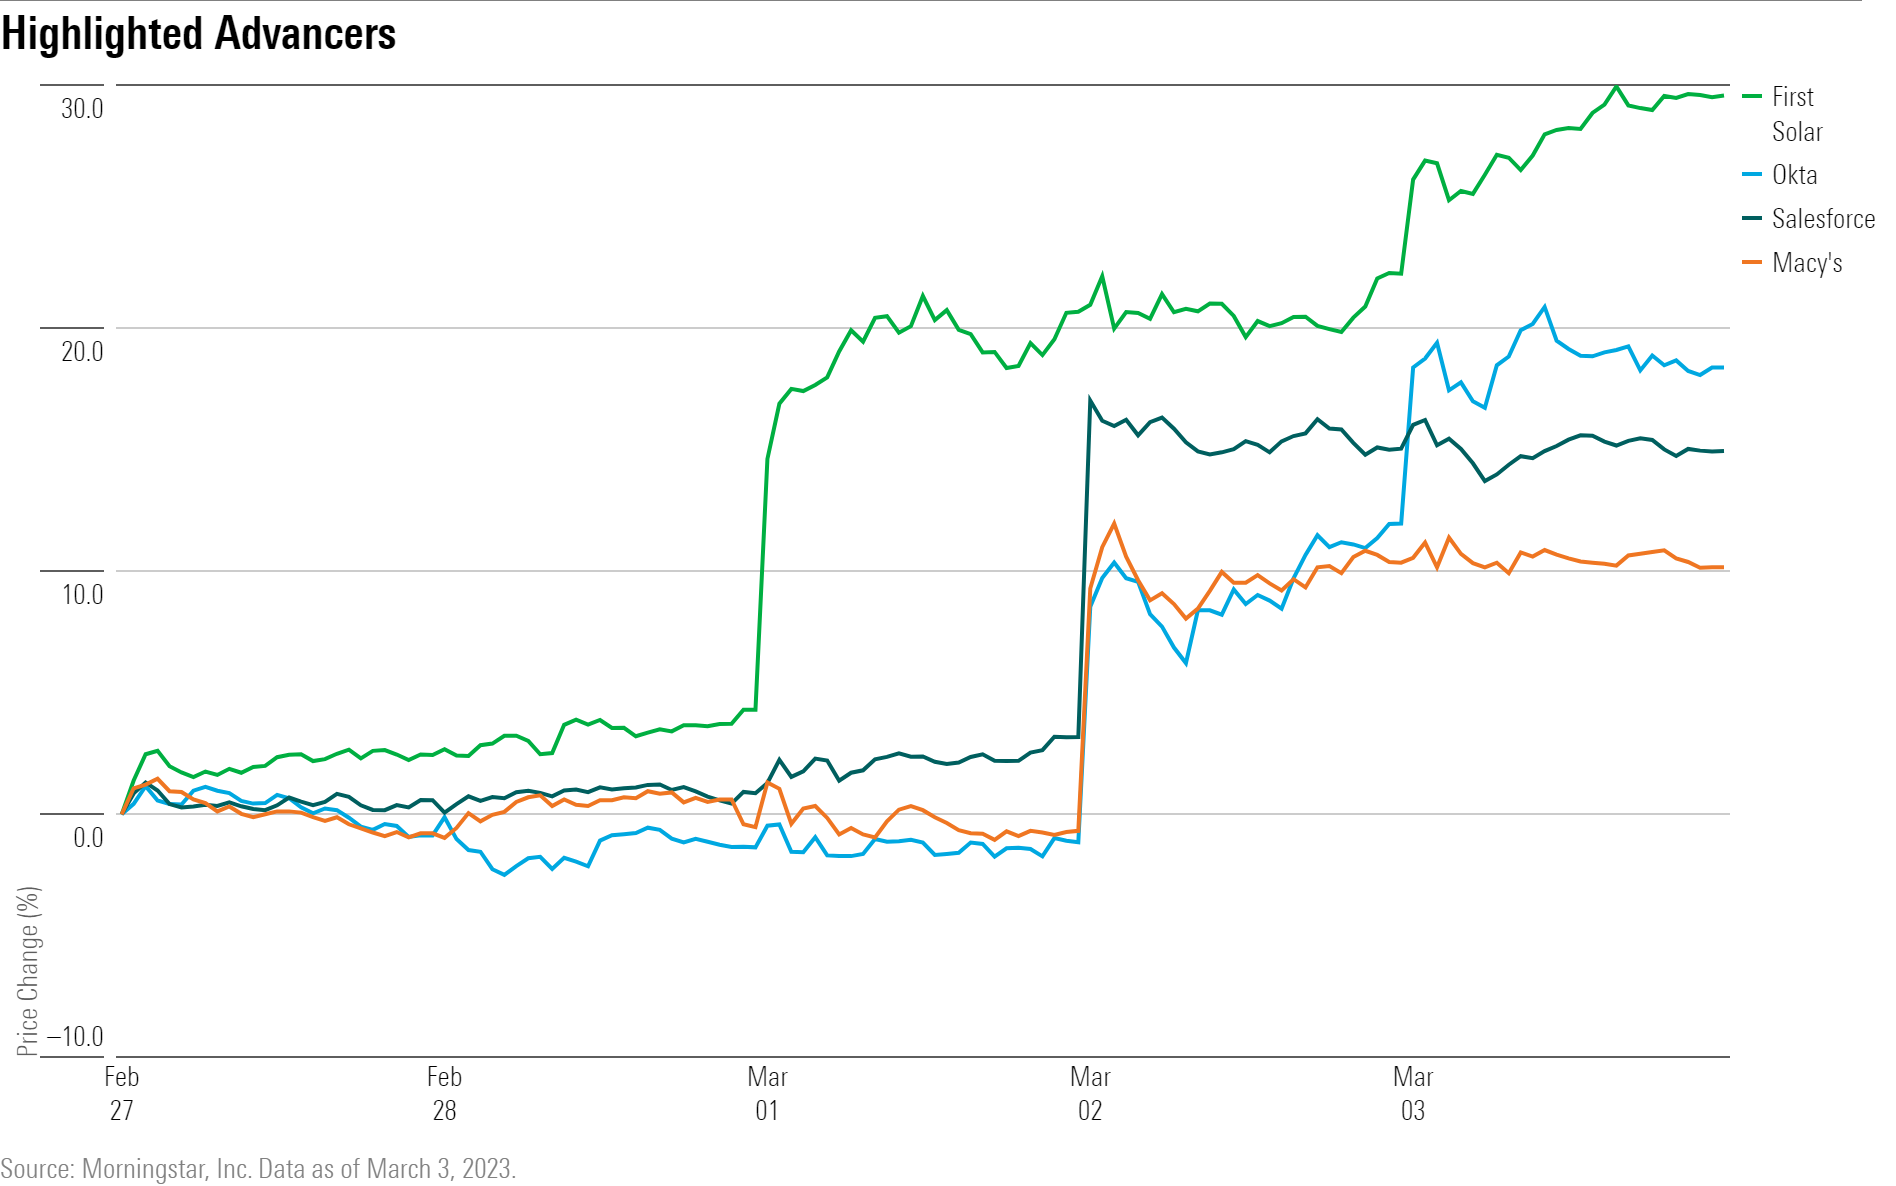 A line chart showing the performance of FSLR, OKTA, CRM, and M stock.